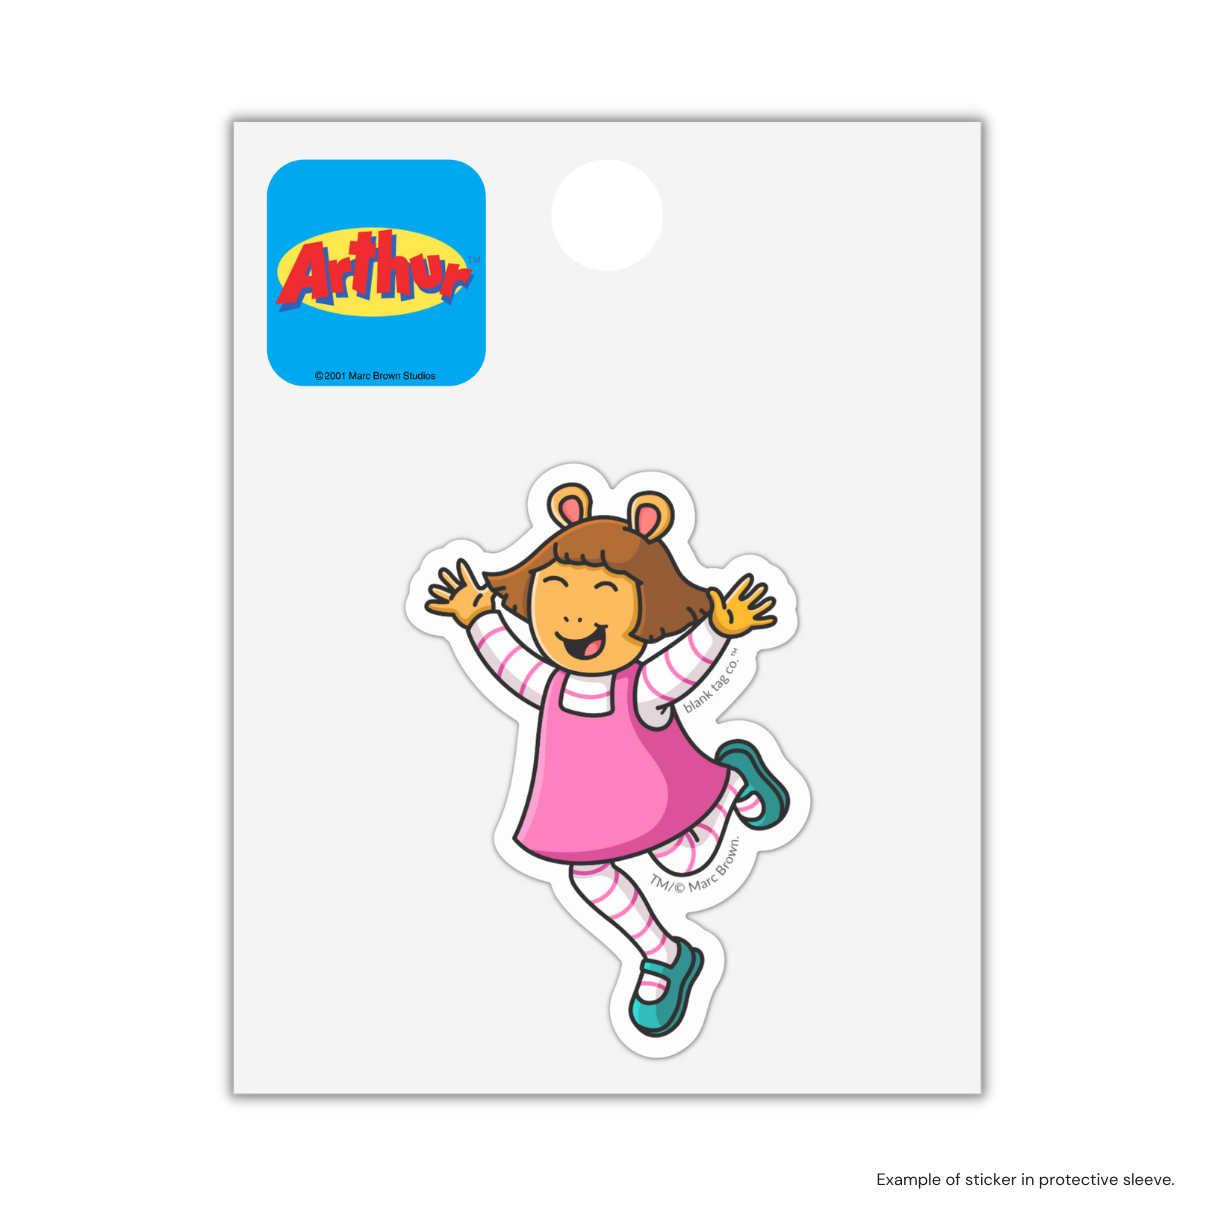 The D.W. Jumping Sticker